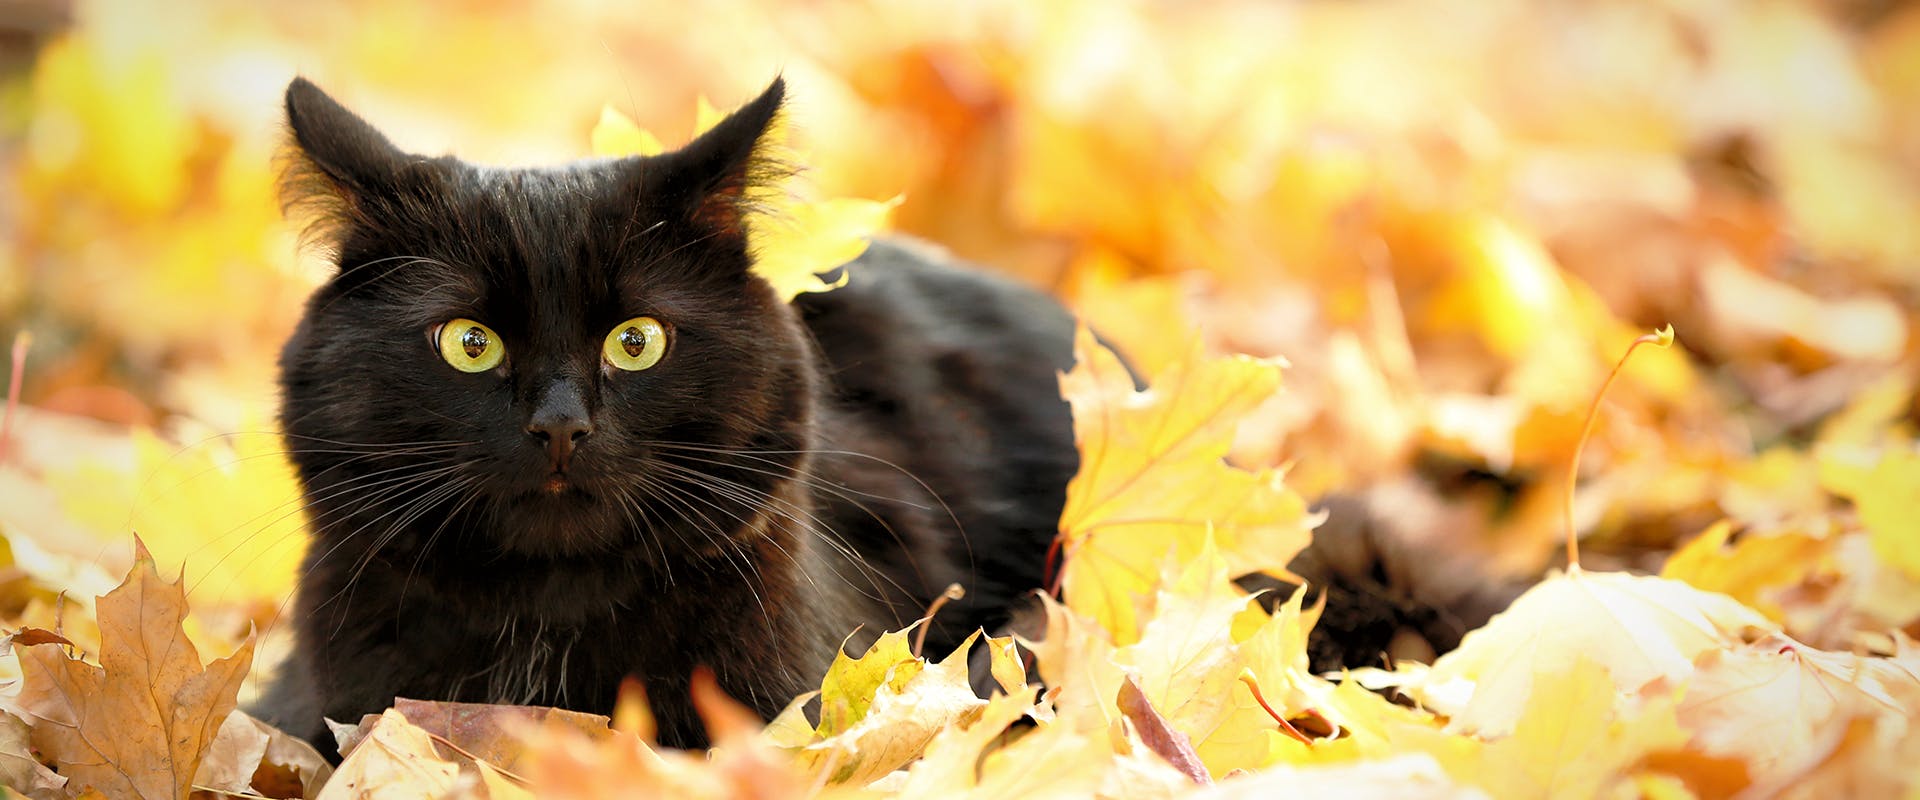 A black cat sat in a pile of autumn leaves